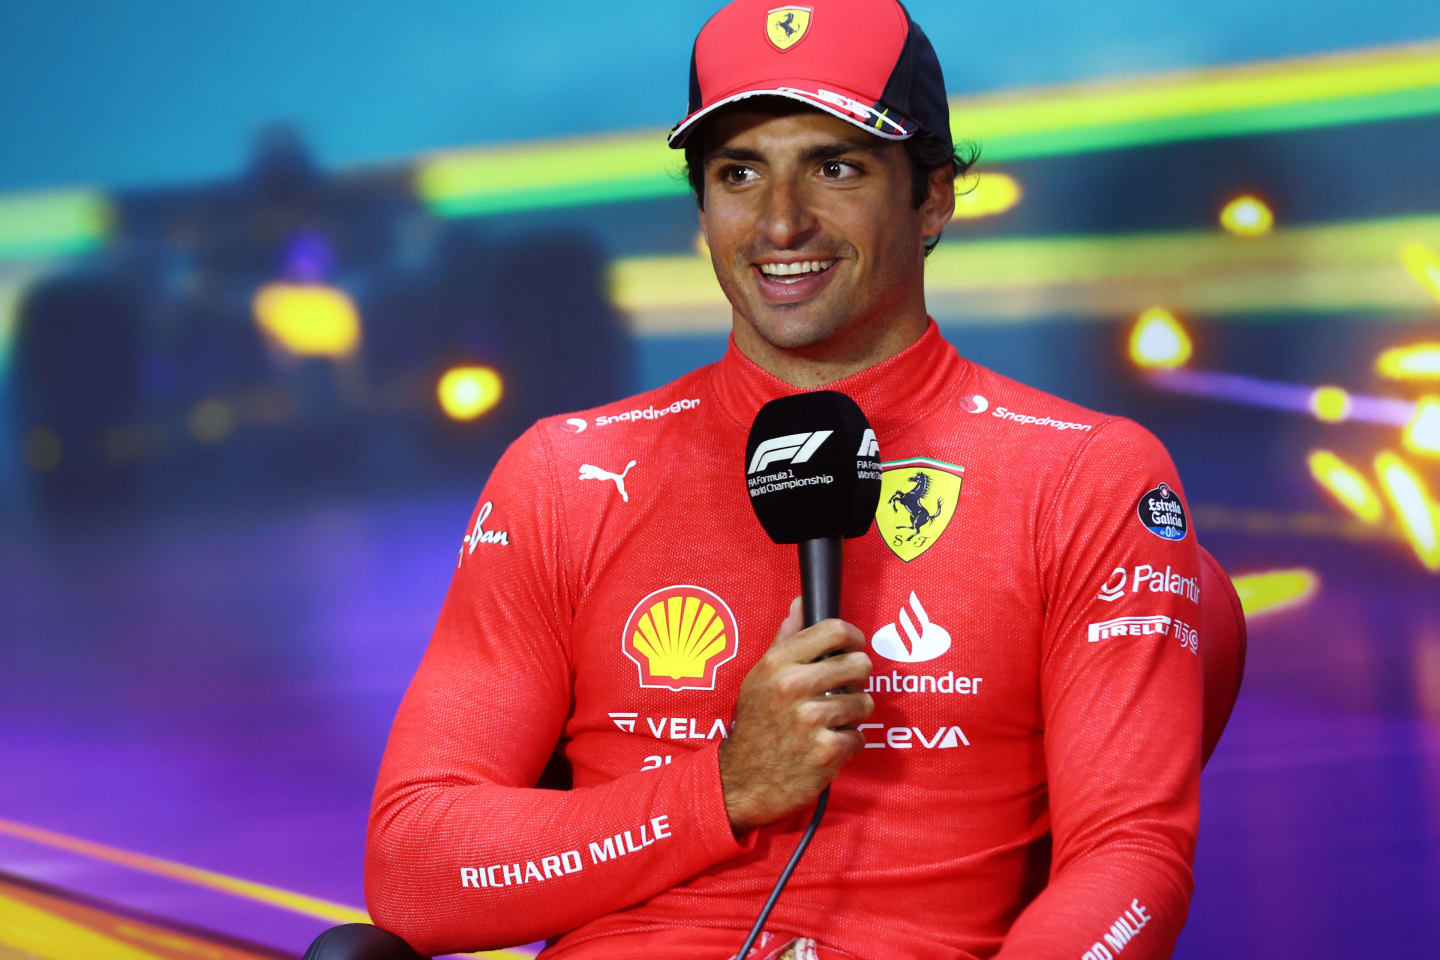 SAO PAULO, BRAZIL - NOVEMBER 12: Second placed Carlos Sainz of Spain and Ferrari talks in a press conference after the Sprint ahead of the F1 Grand Prix of Brazil at Autodromo Jose Carlos Pace on November 12, 2022 in Sao Paulo, Brazil. (Photo by Dan Istitene/Getty Images)